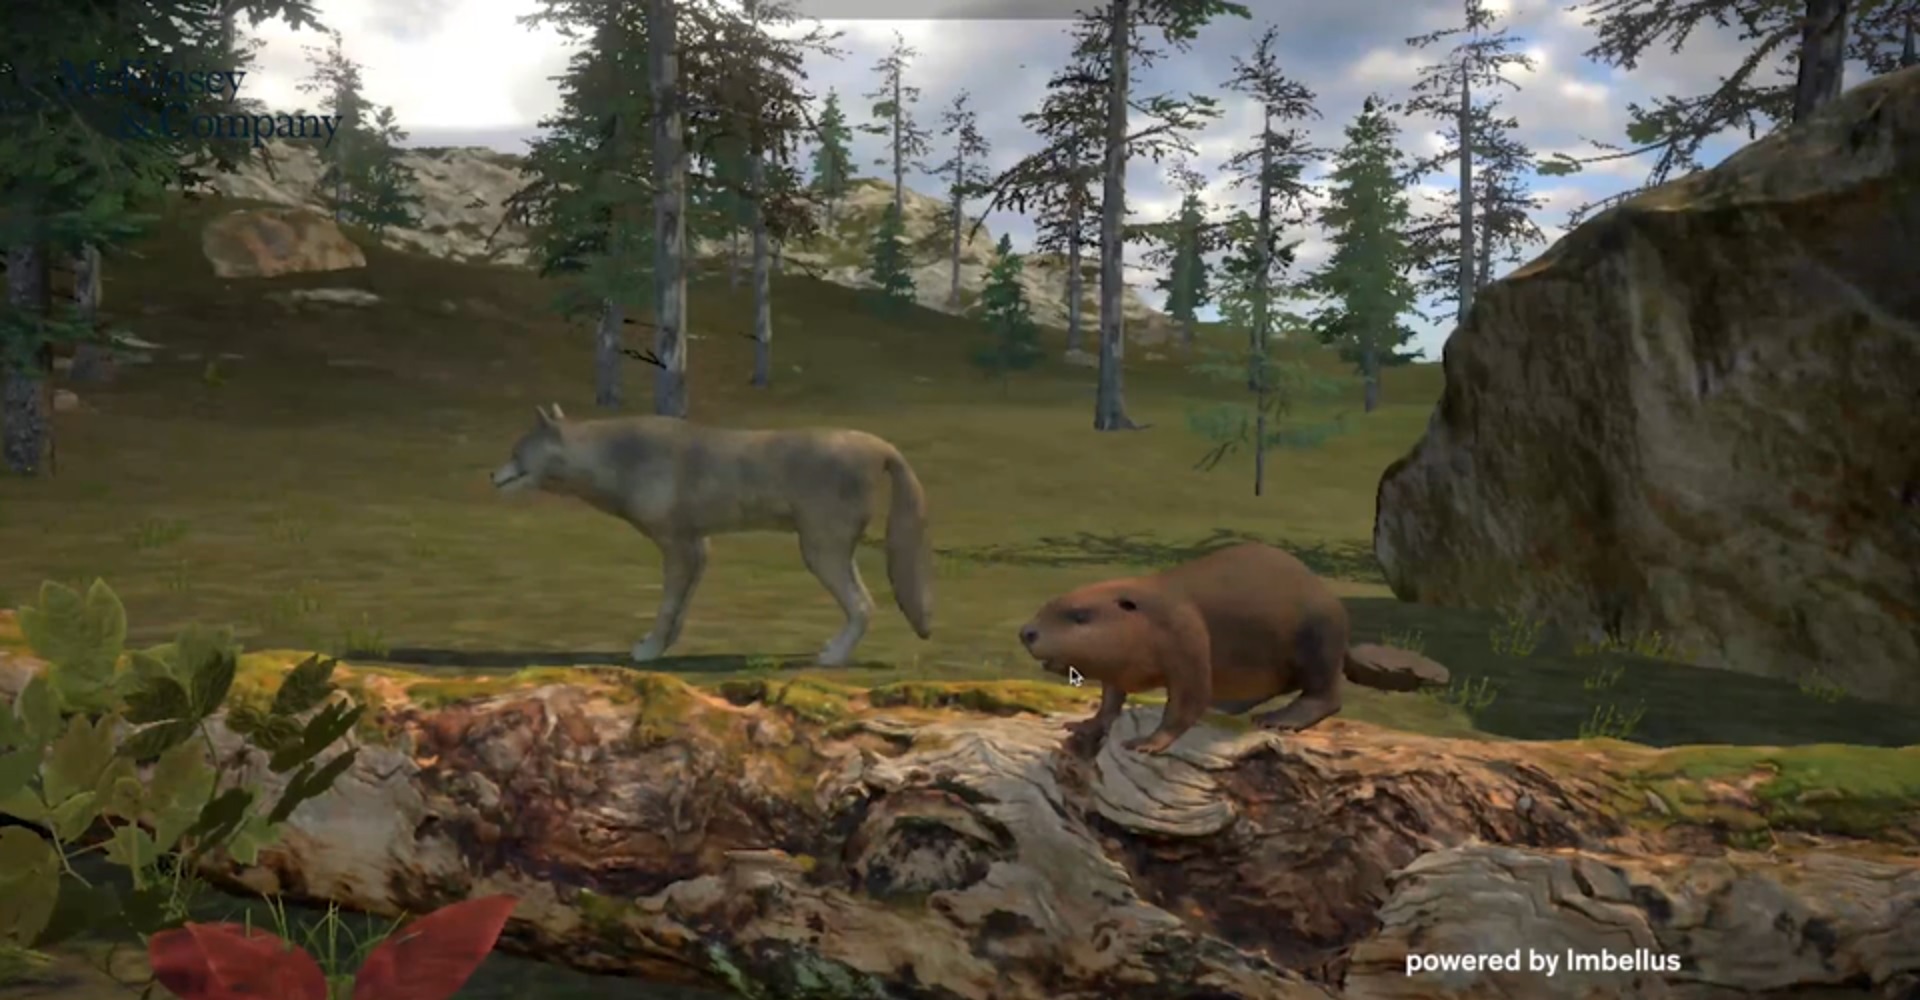 Screenshot of a wolf and beaver in a forest habitat from the Solve assessment